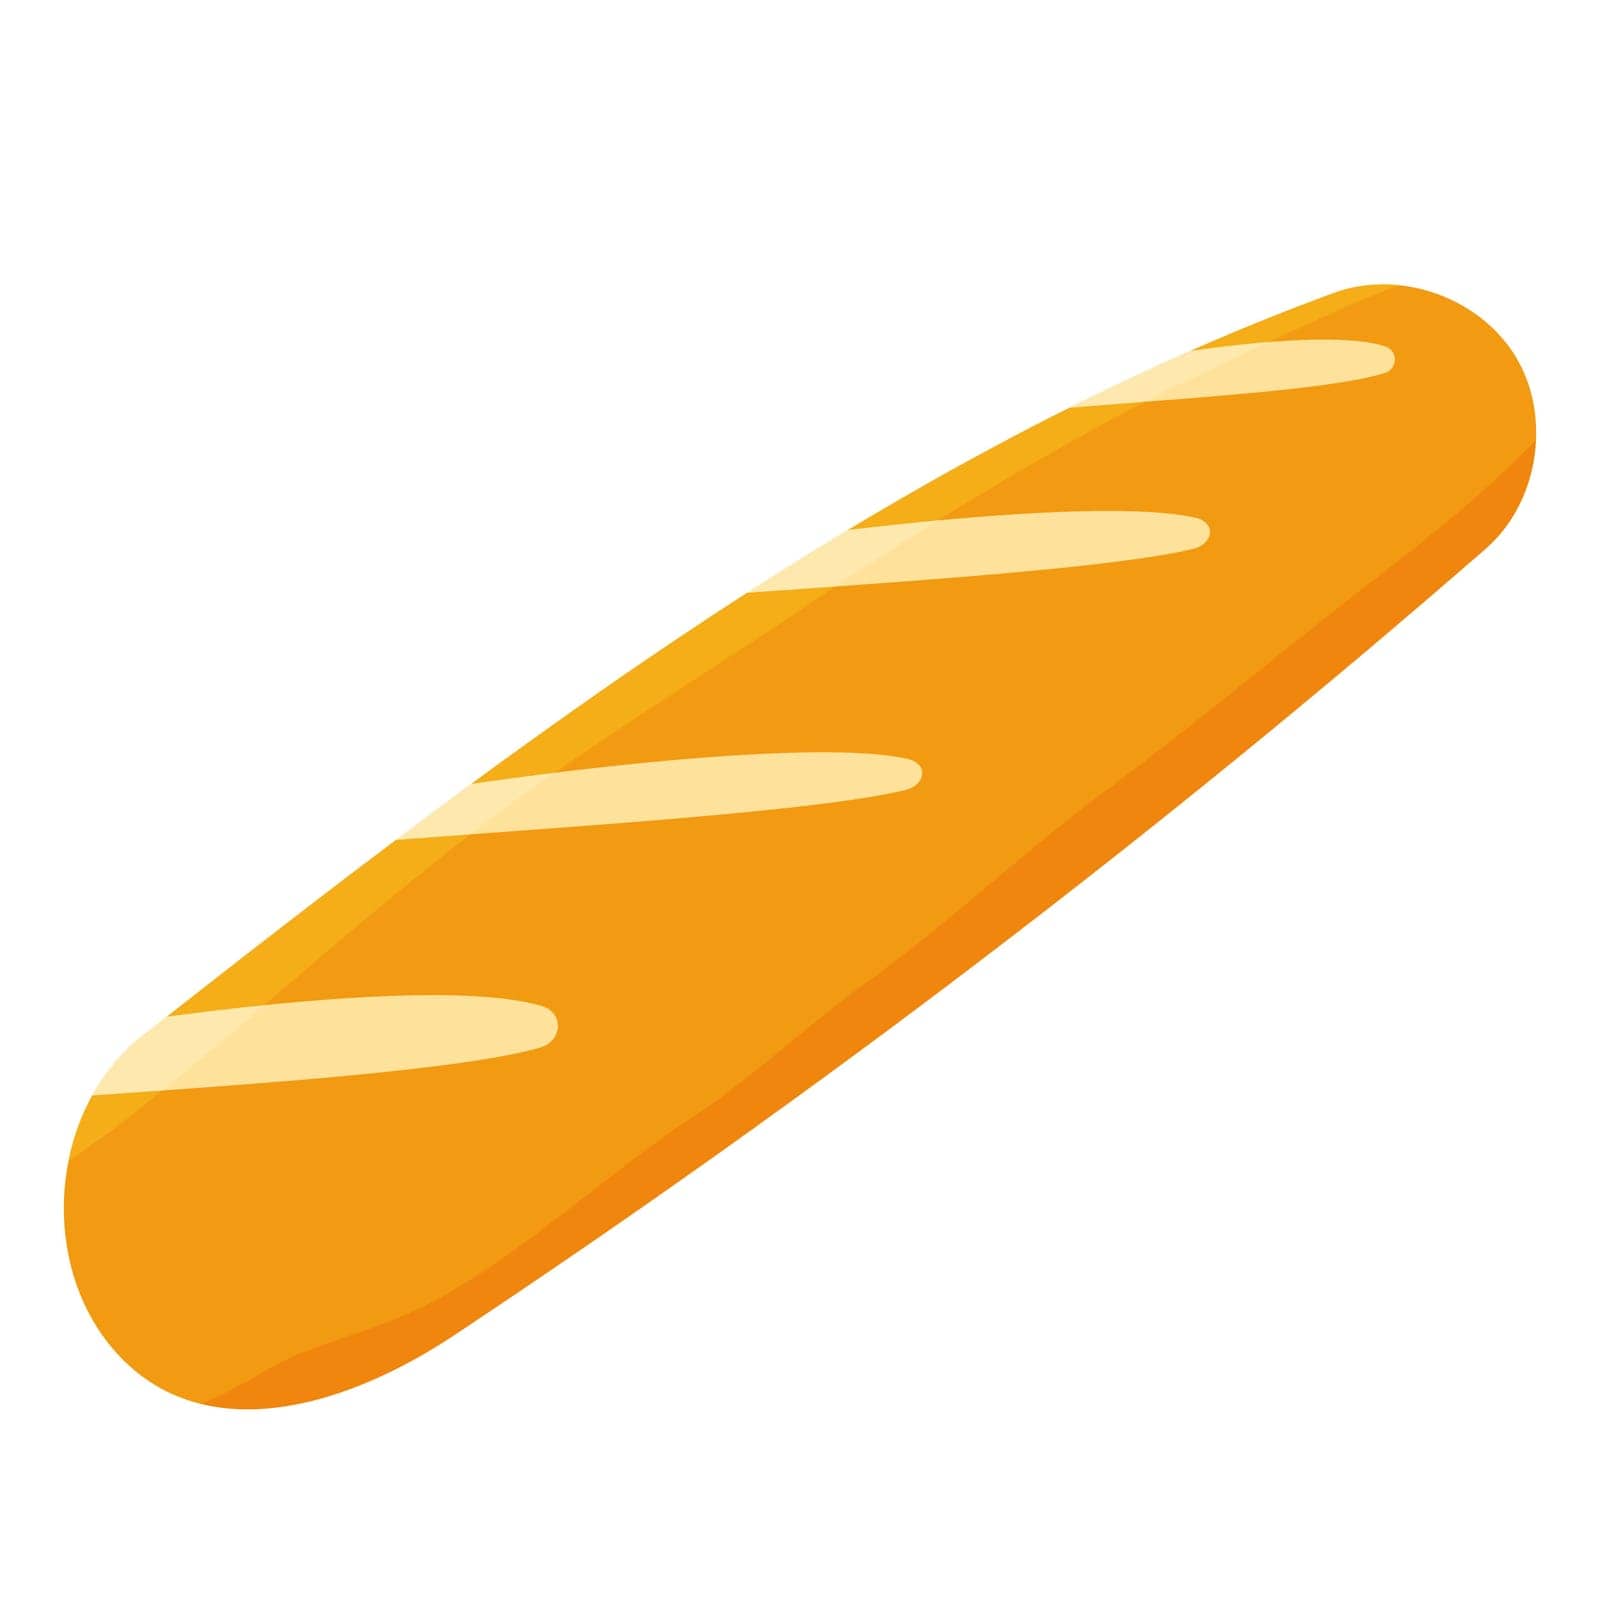 loaf long pastry bread france paris olympics colored icon element vector illustration